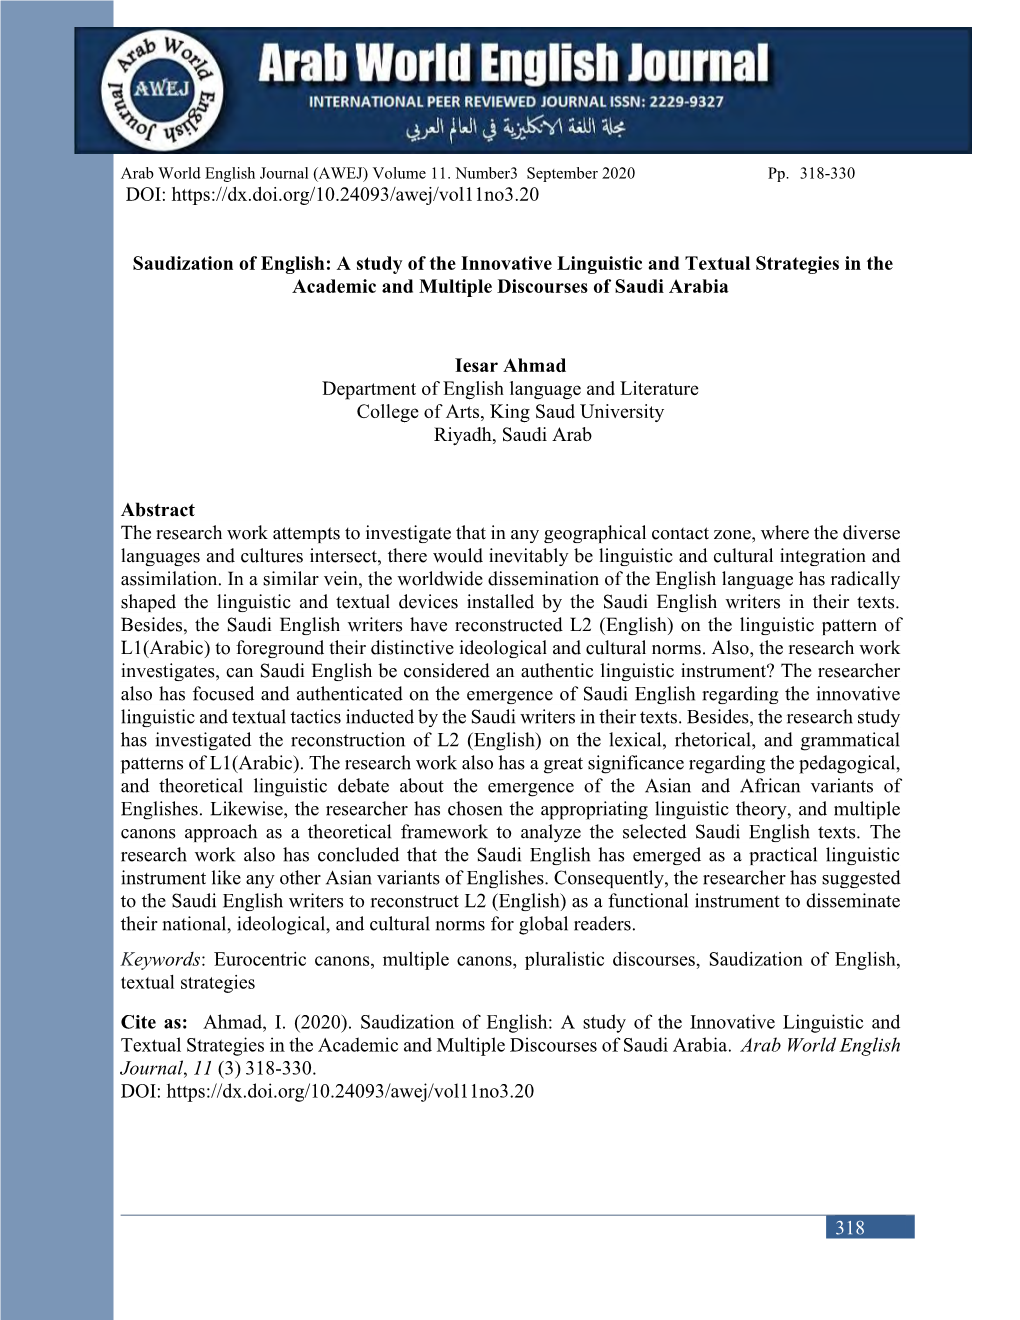 Saudization of English: a Study of the Innovative Linguistic and Textual Strategies in the Academic and Multiple Discourses of Saudi Arabia